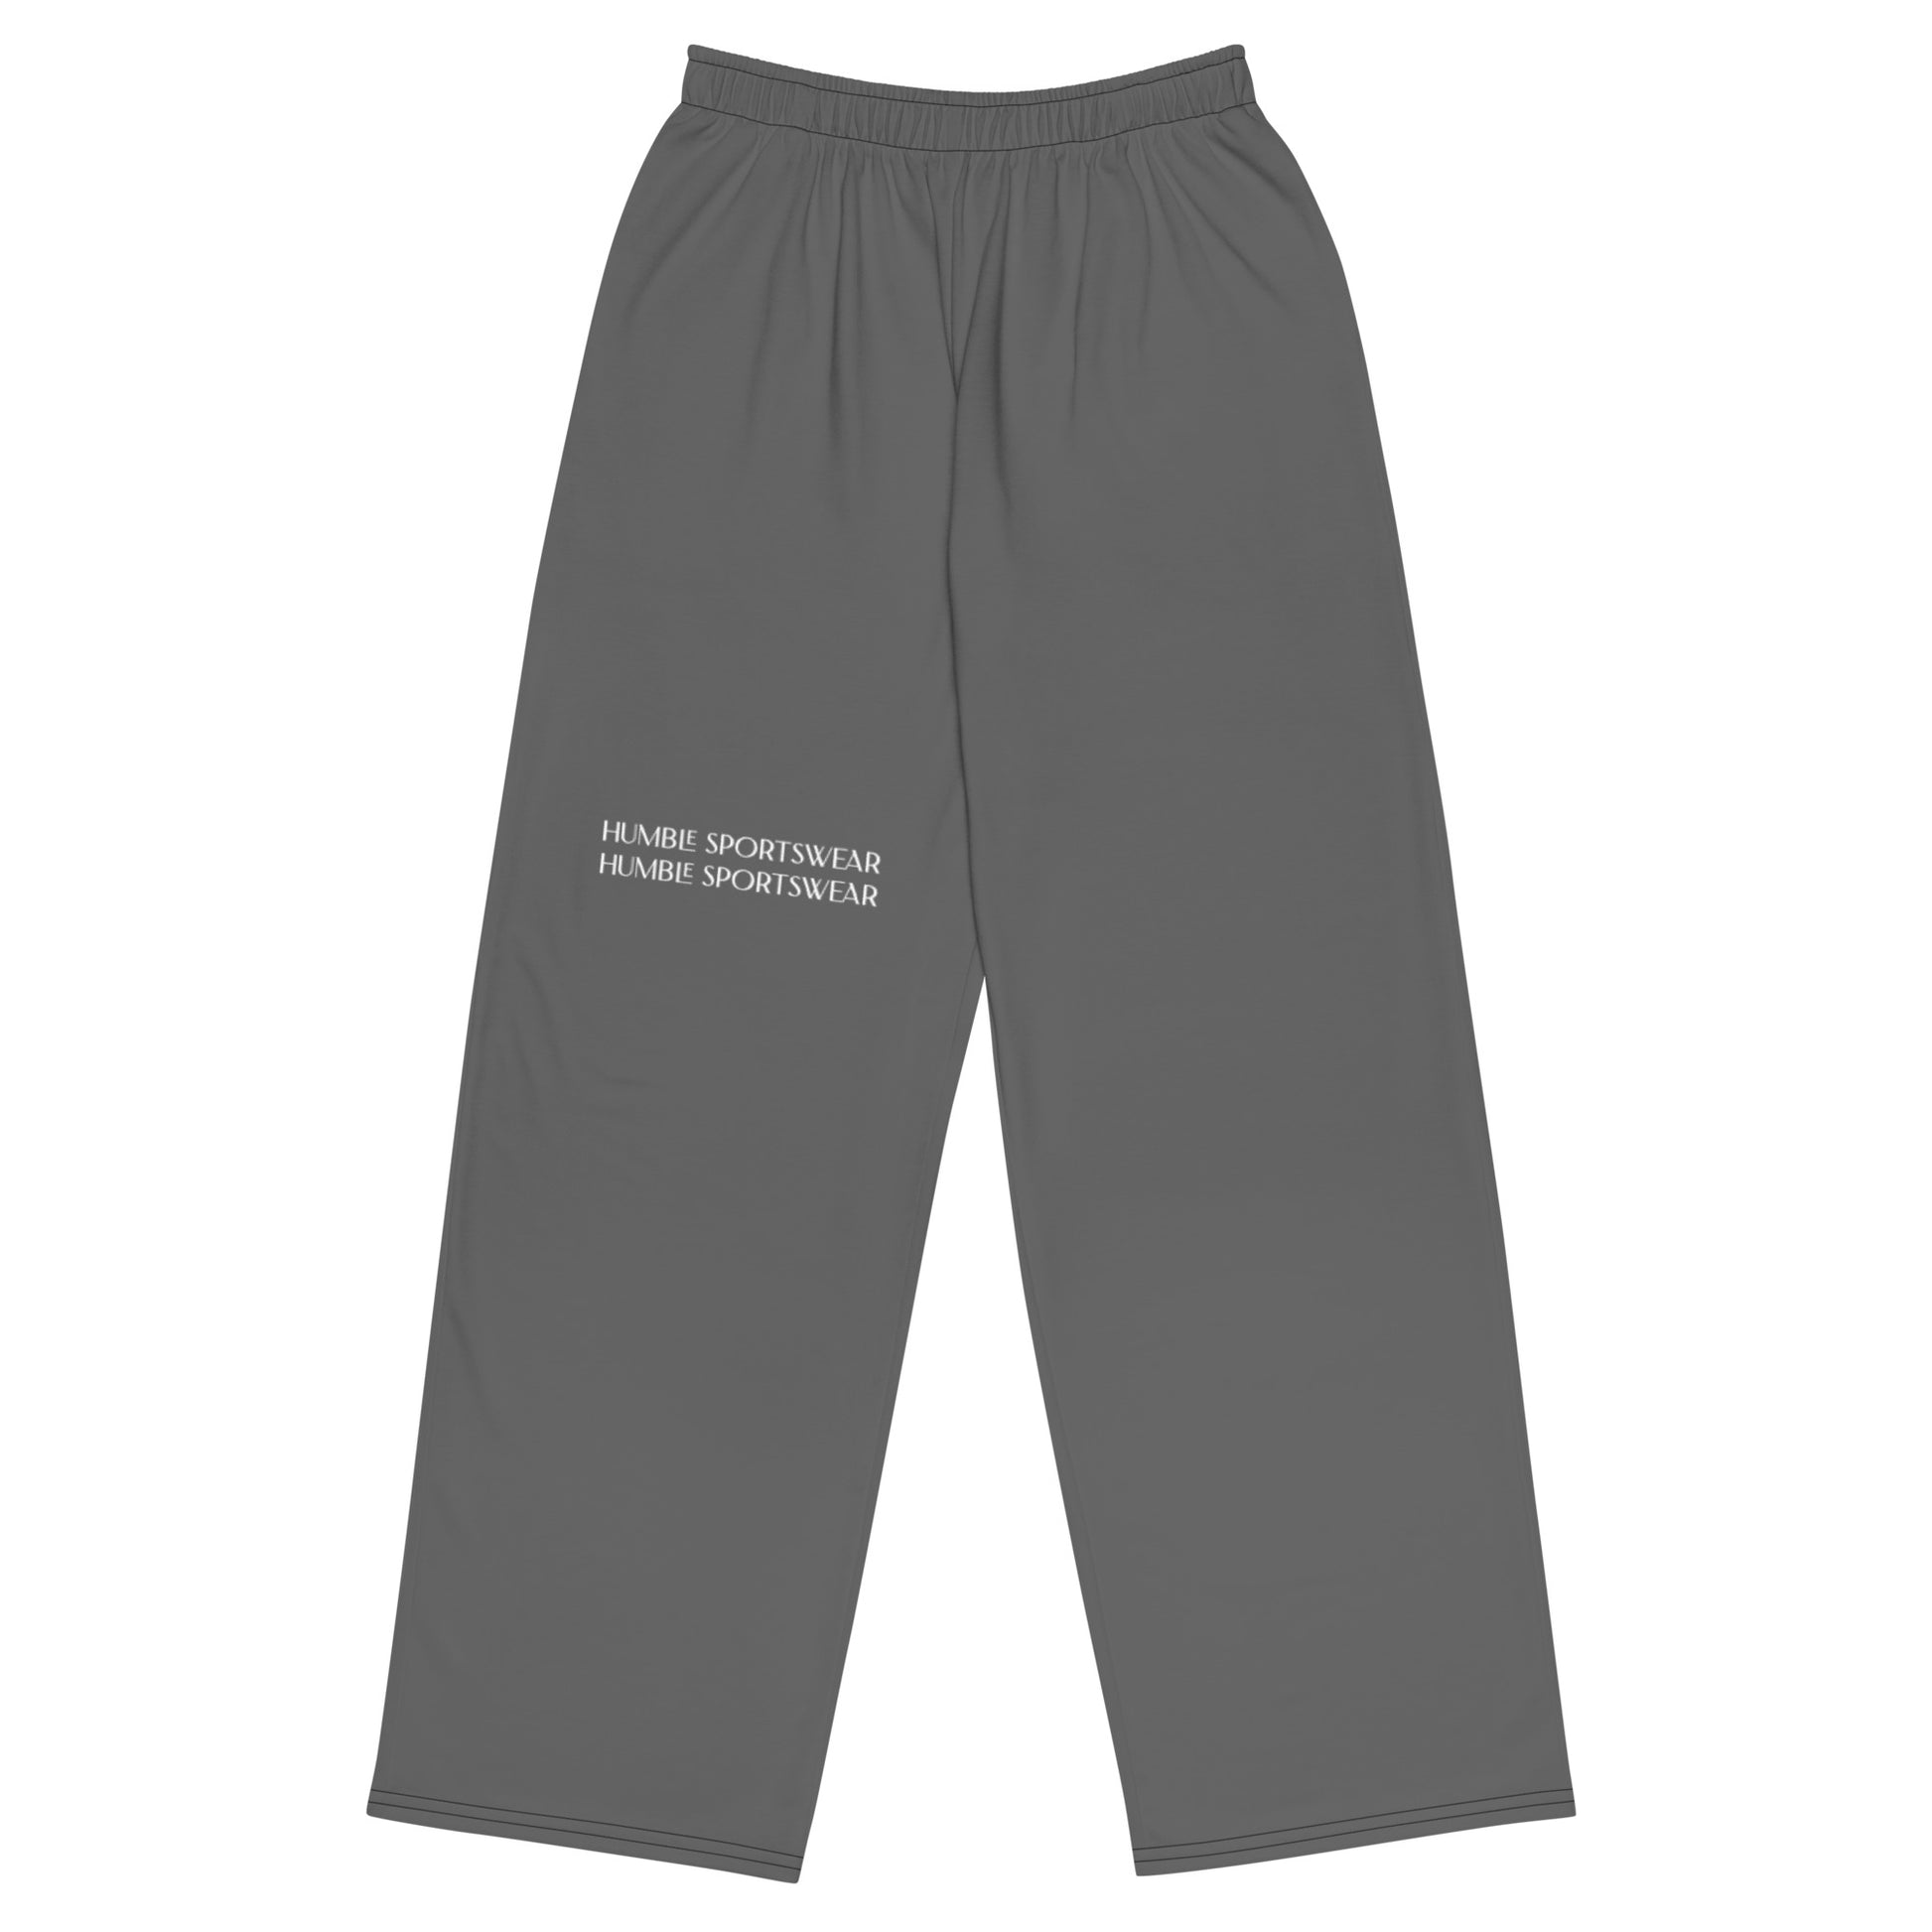 Humble Sportswear, men's color match active and loungewear pants grey